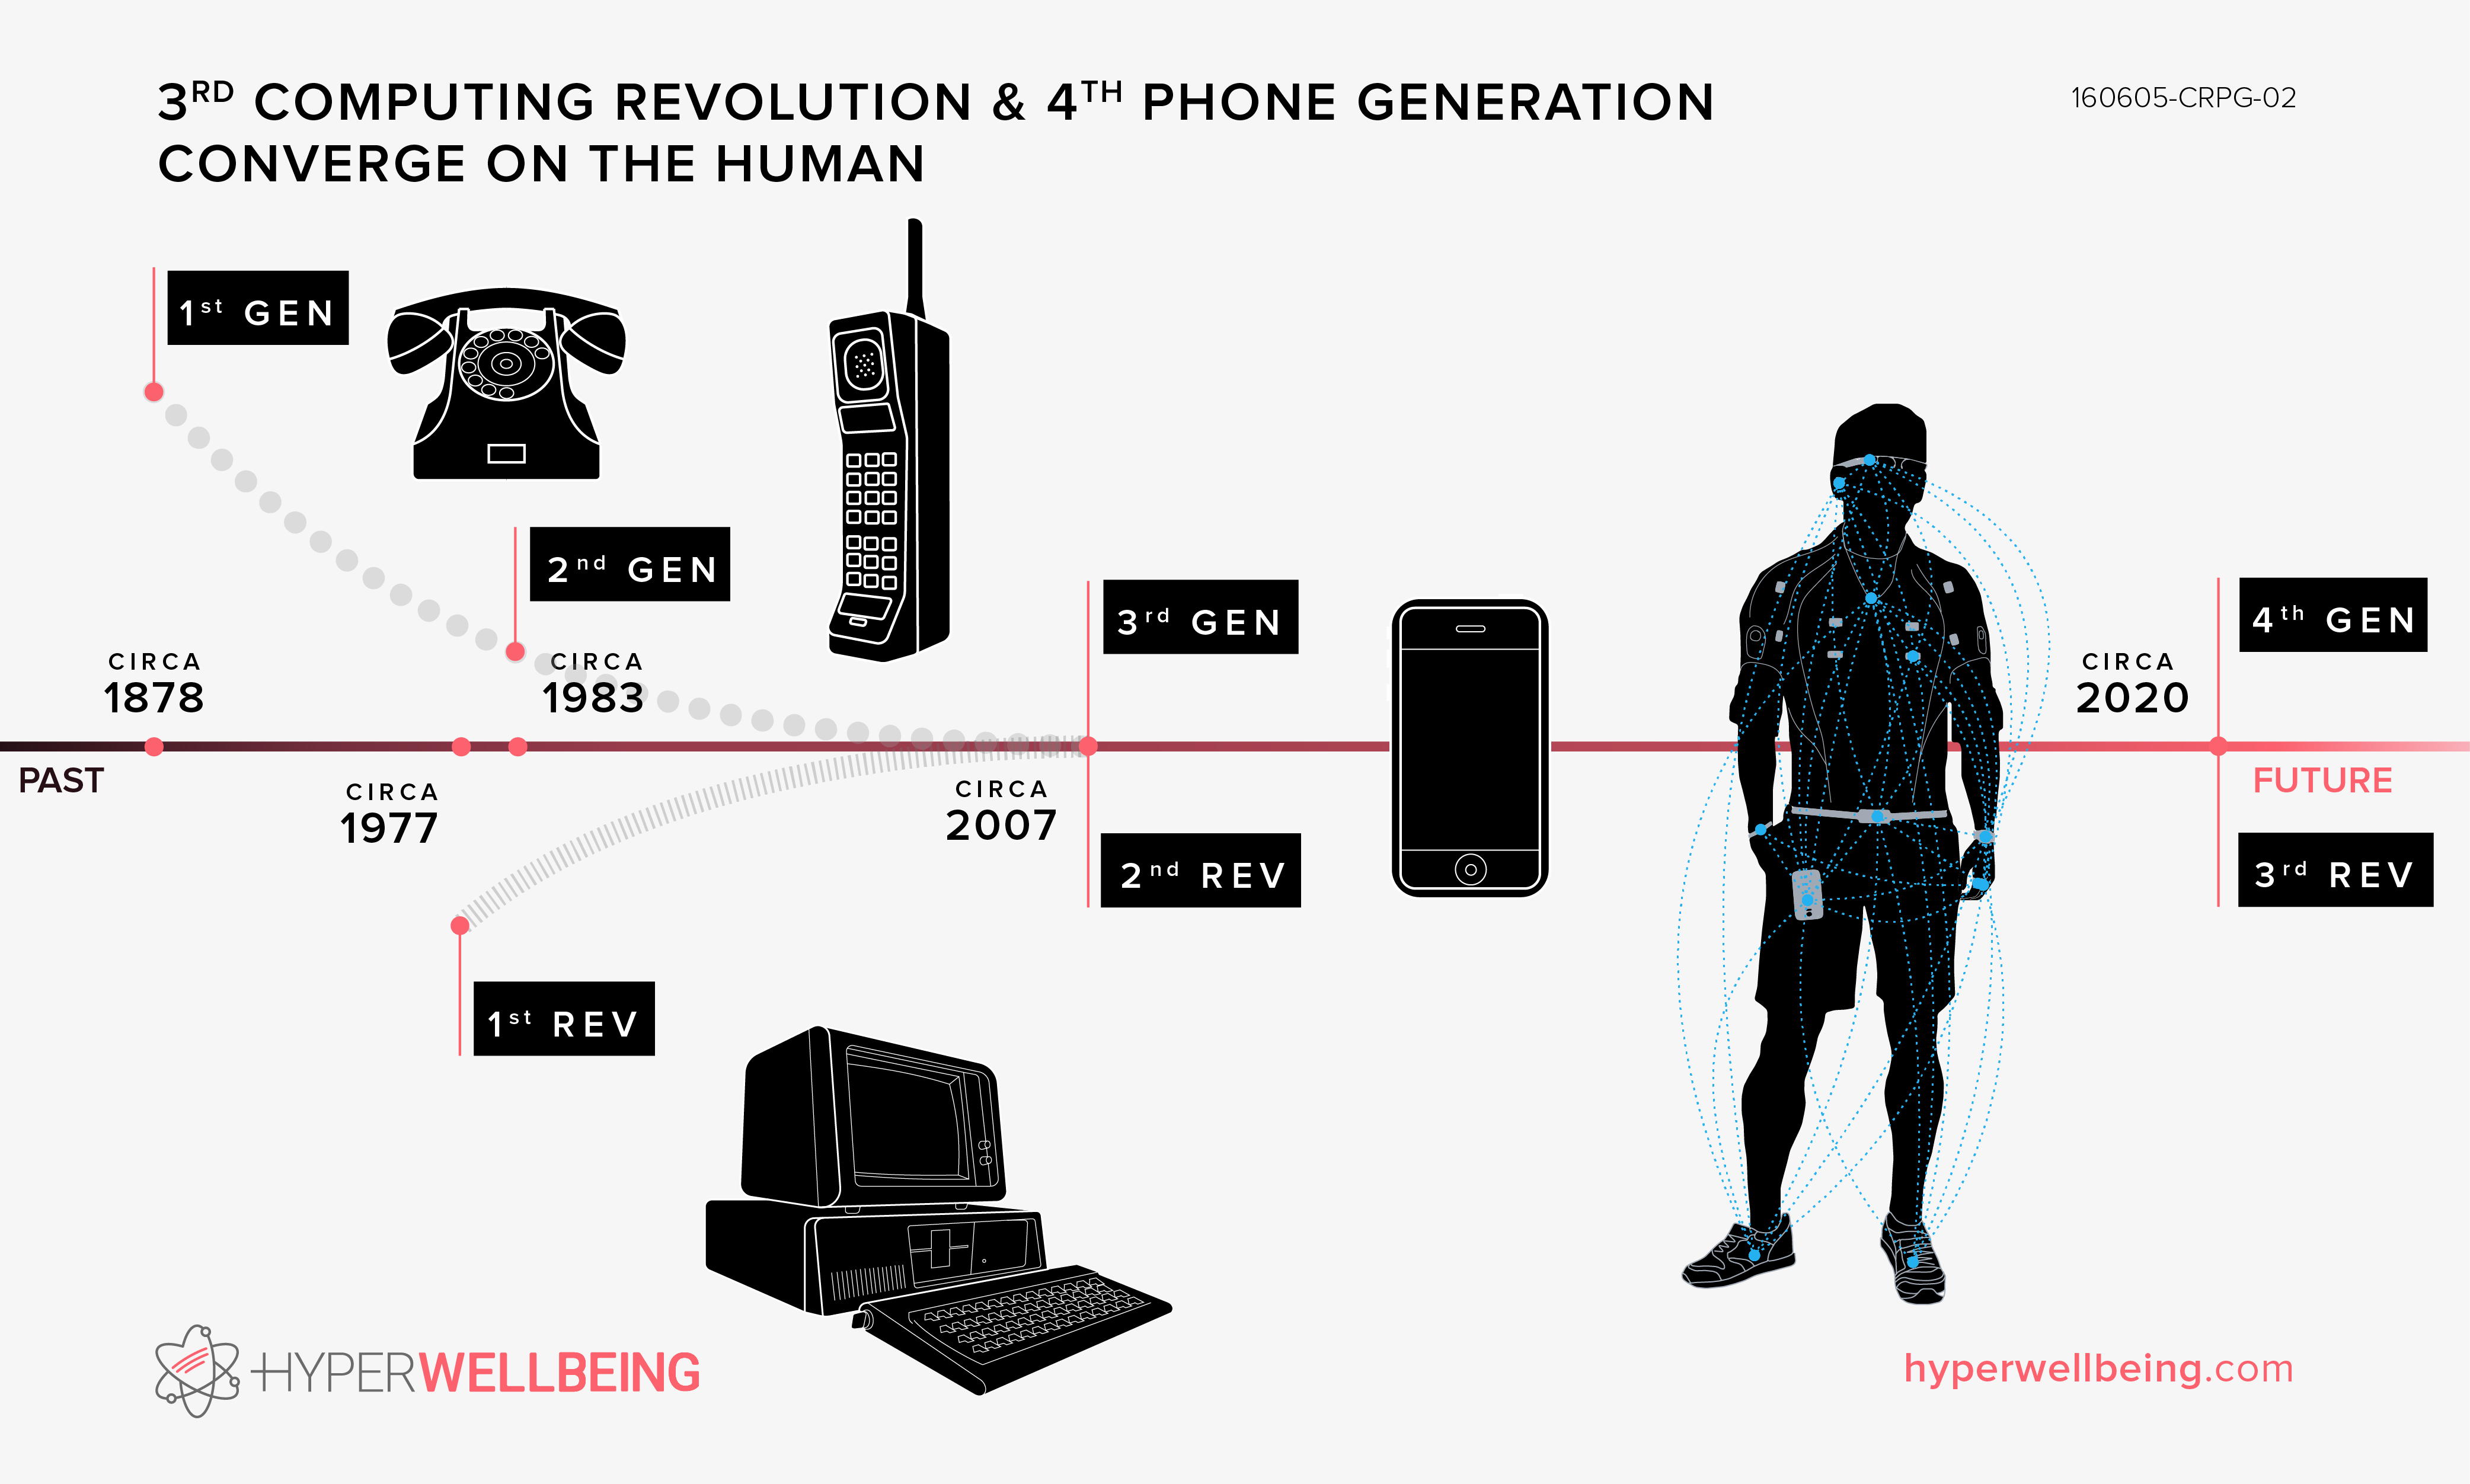 160605-CRPG-02_3rd-Computing-Revolution-and-4th-Phone-Generation-Converge-on-the-Human